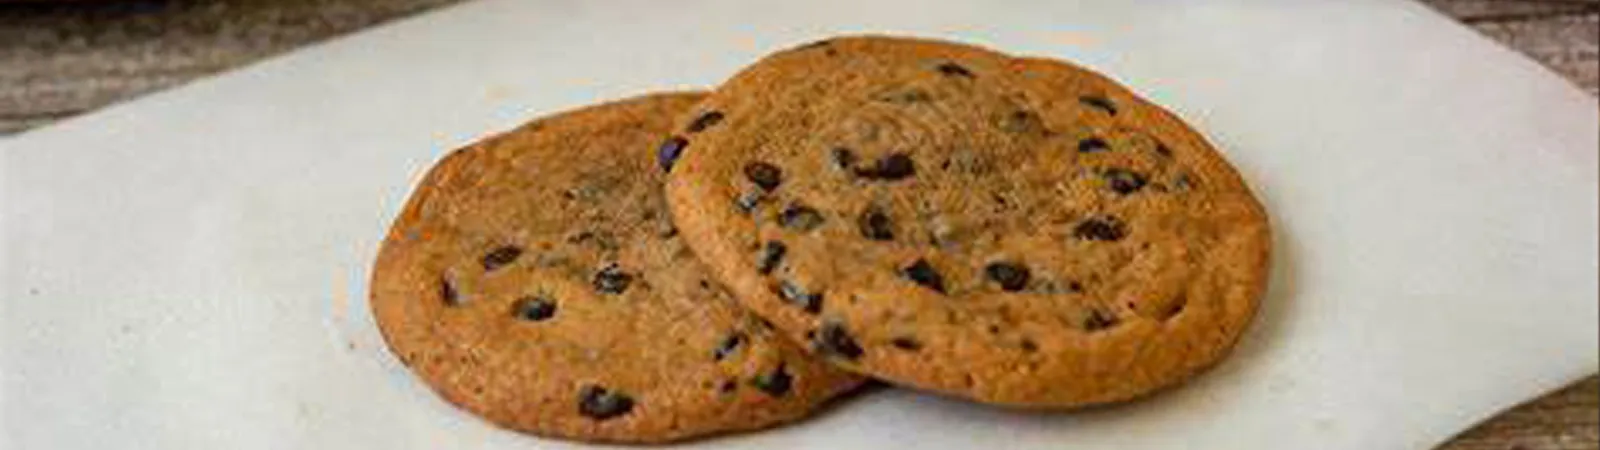 Chocolate Chip Cookies, United States